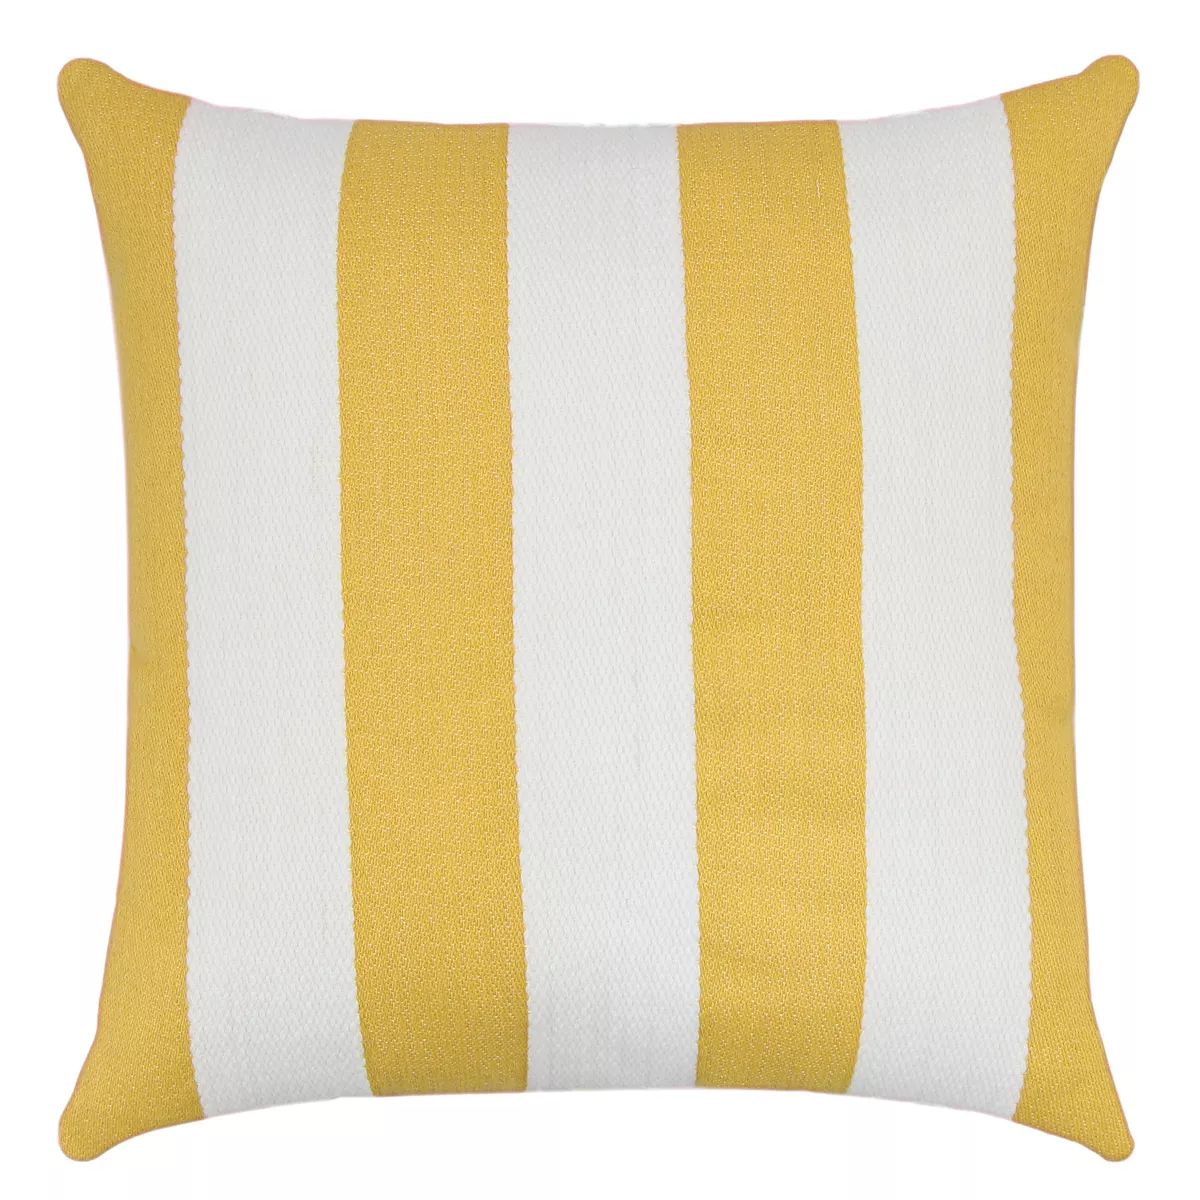 Sonoma Goods For Life® Striped Cabana Woven Outdoor Throw Pillow | Kohl's